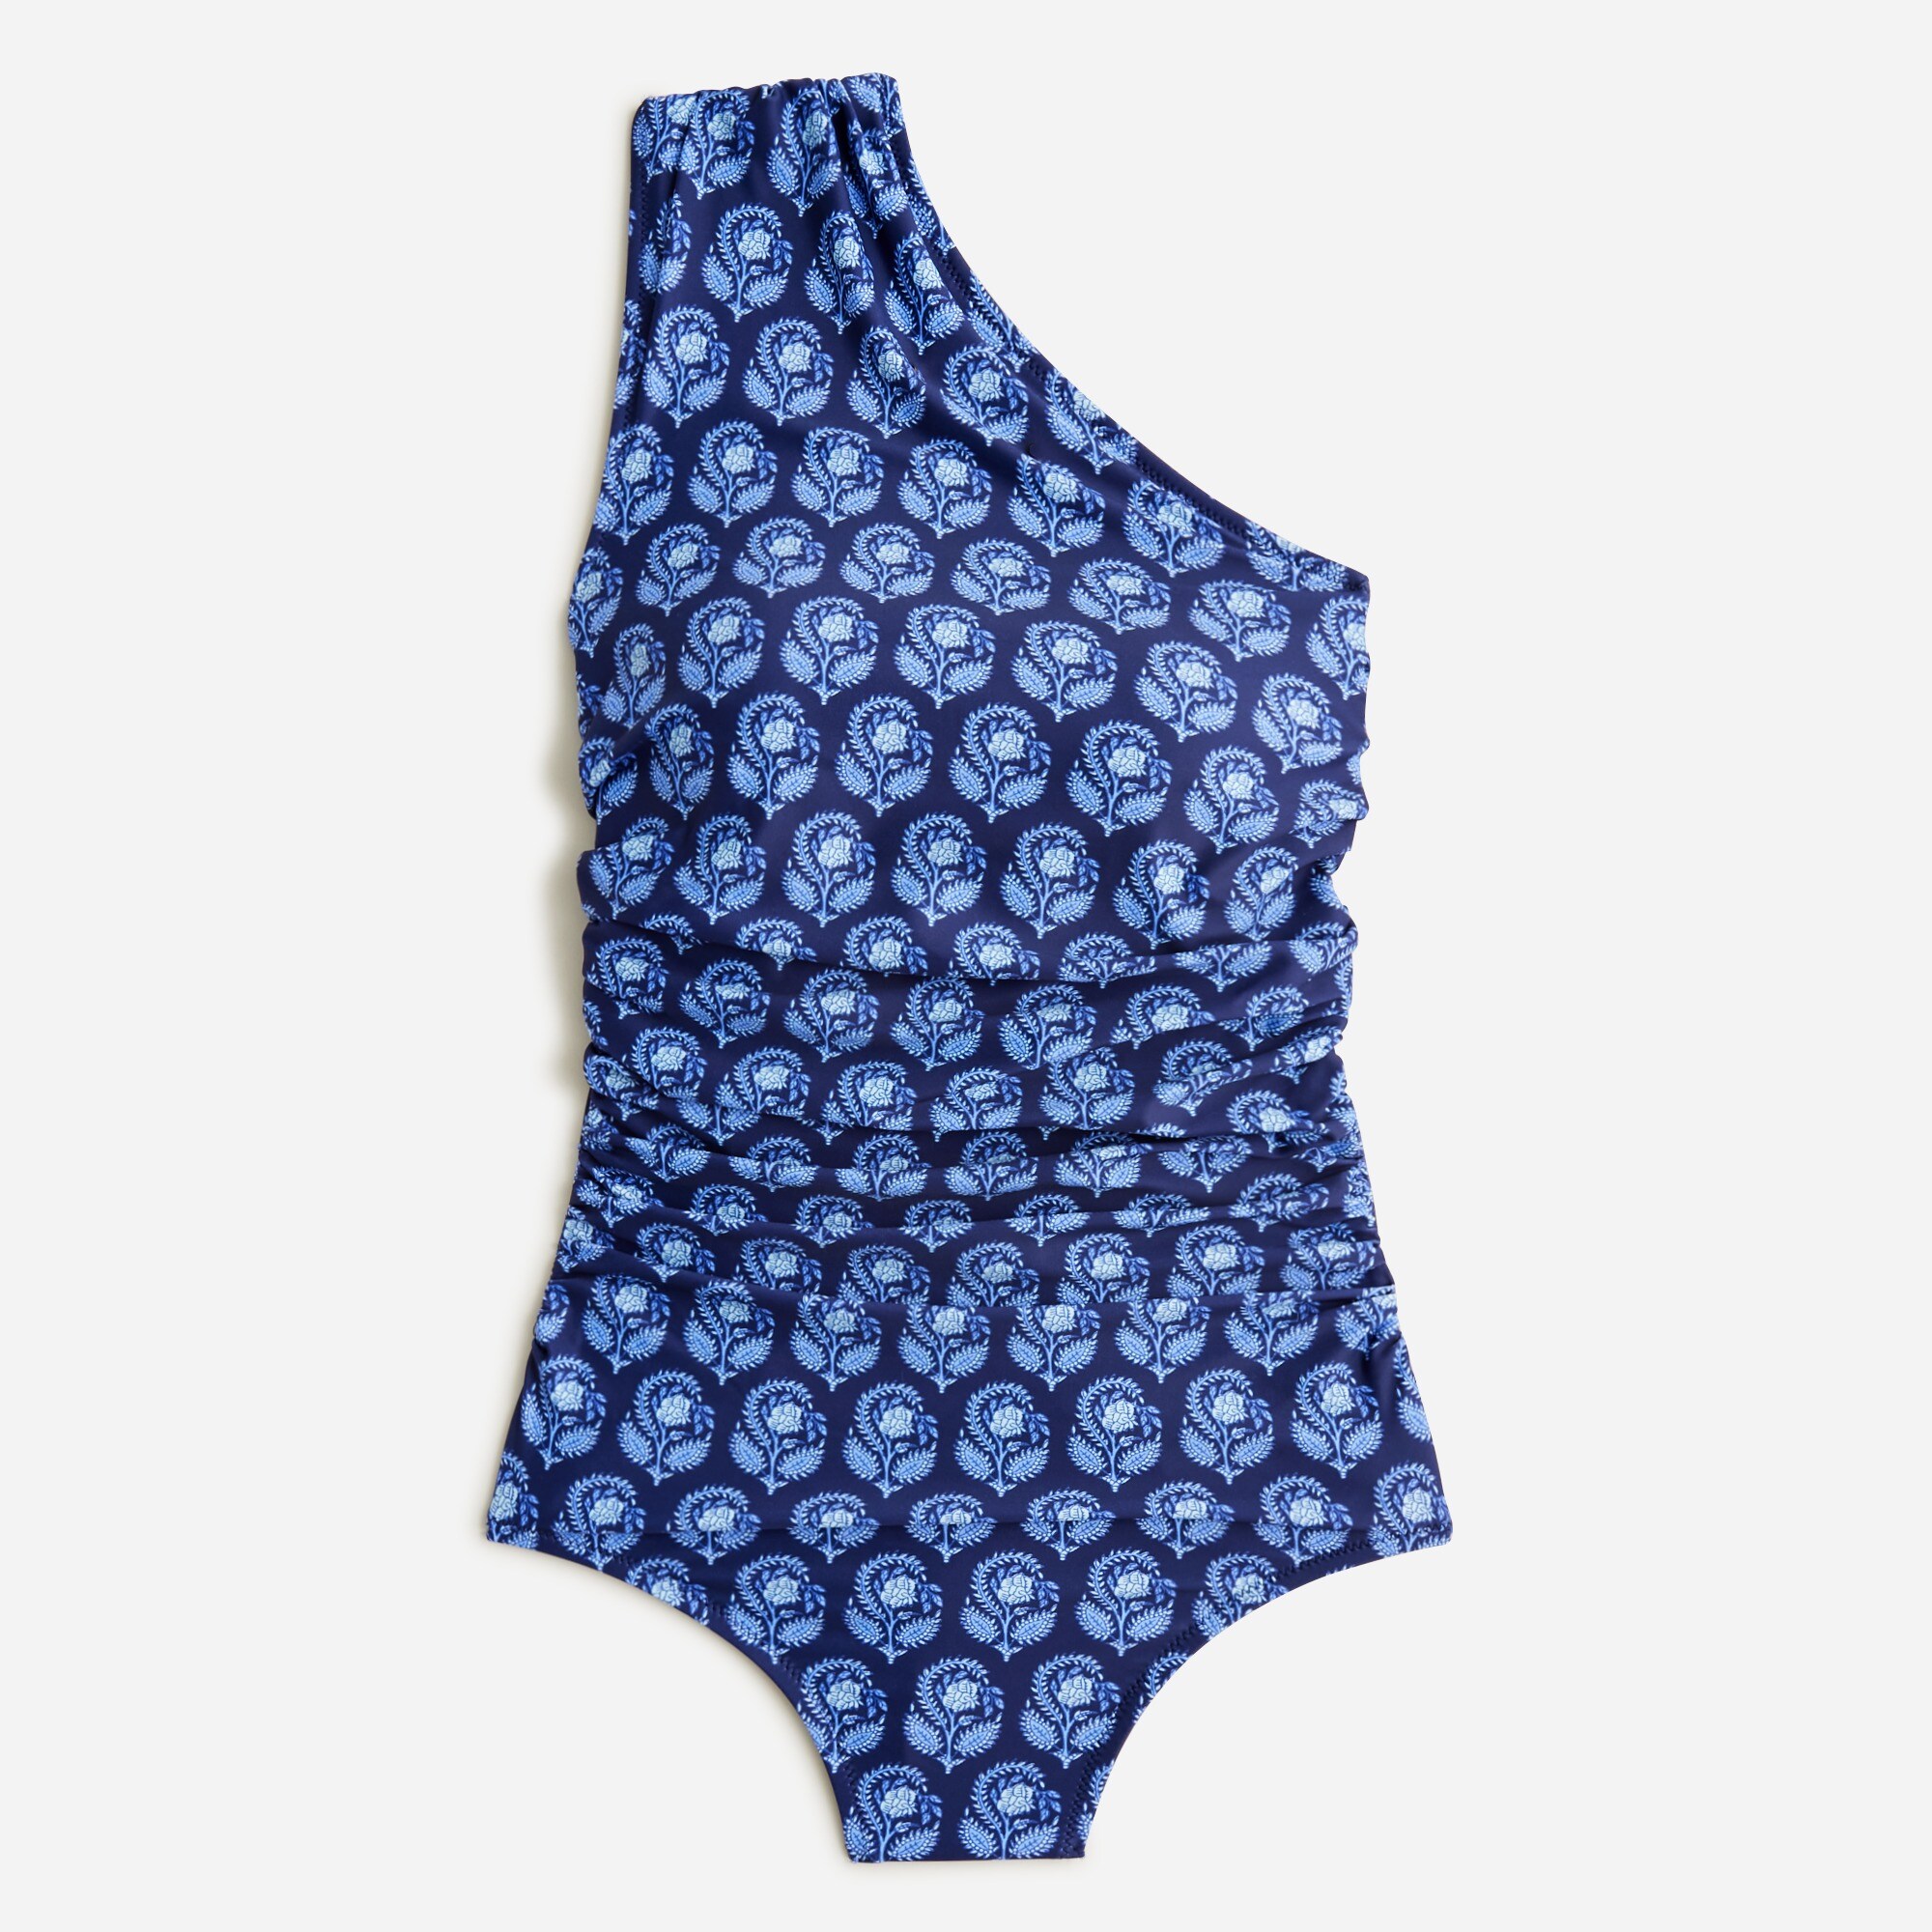  Long-torso ruched one-shoulder one-piece swimsuit in navy bouquet block print